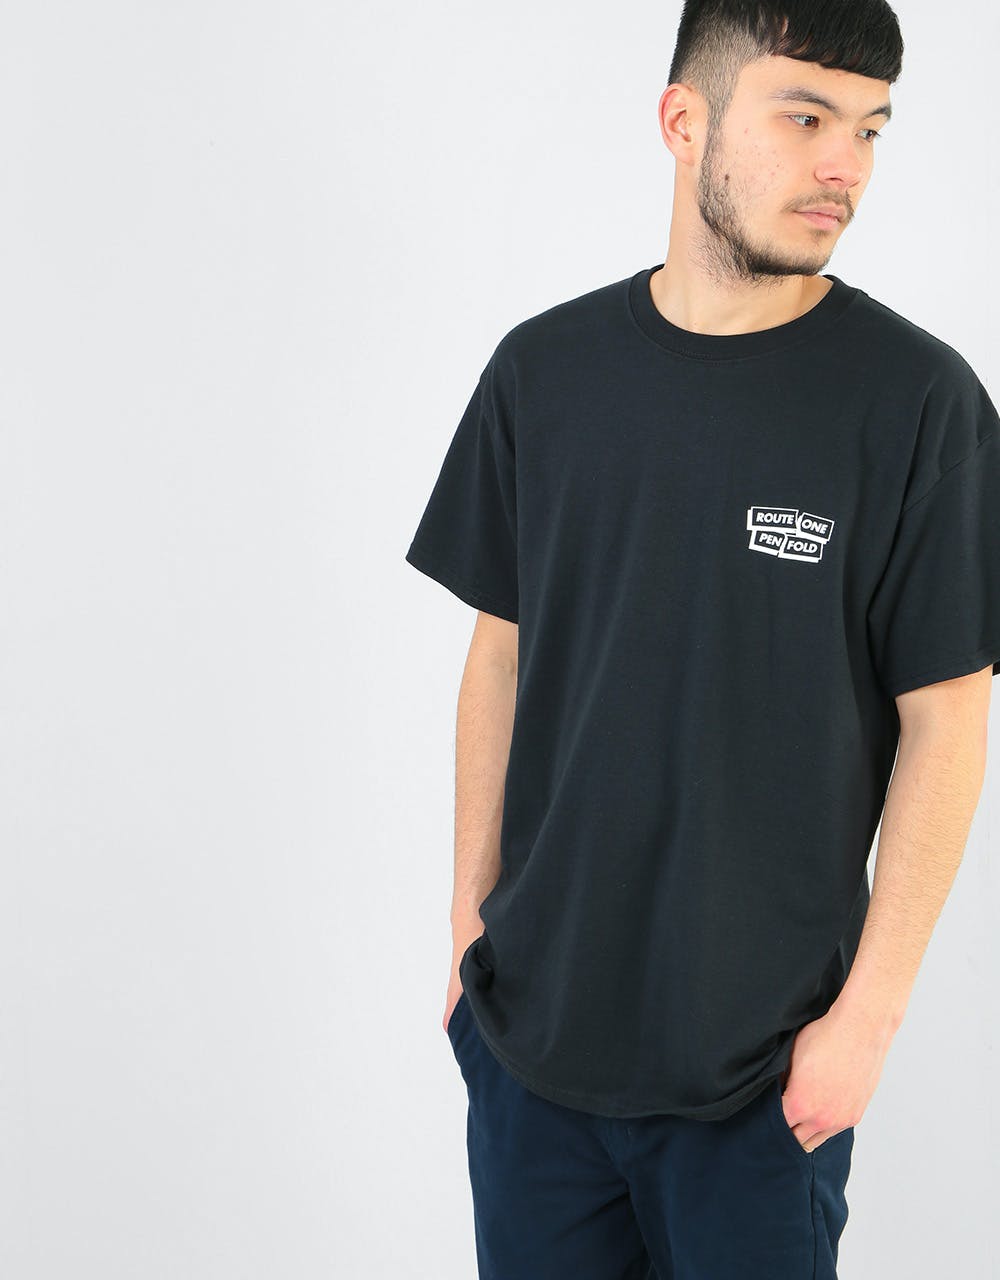 Route One x Mr. Penfold Tear Down T-Shirt - Black